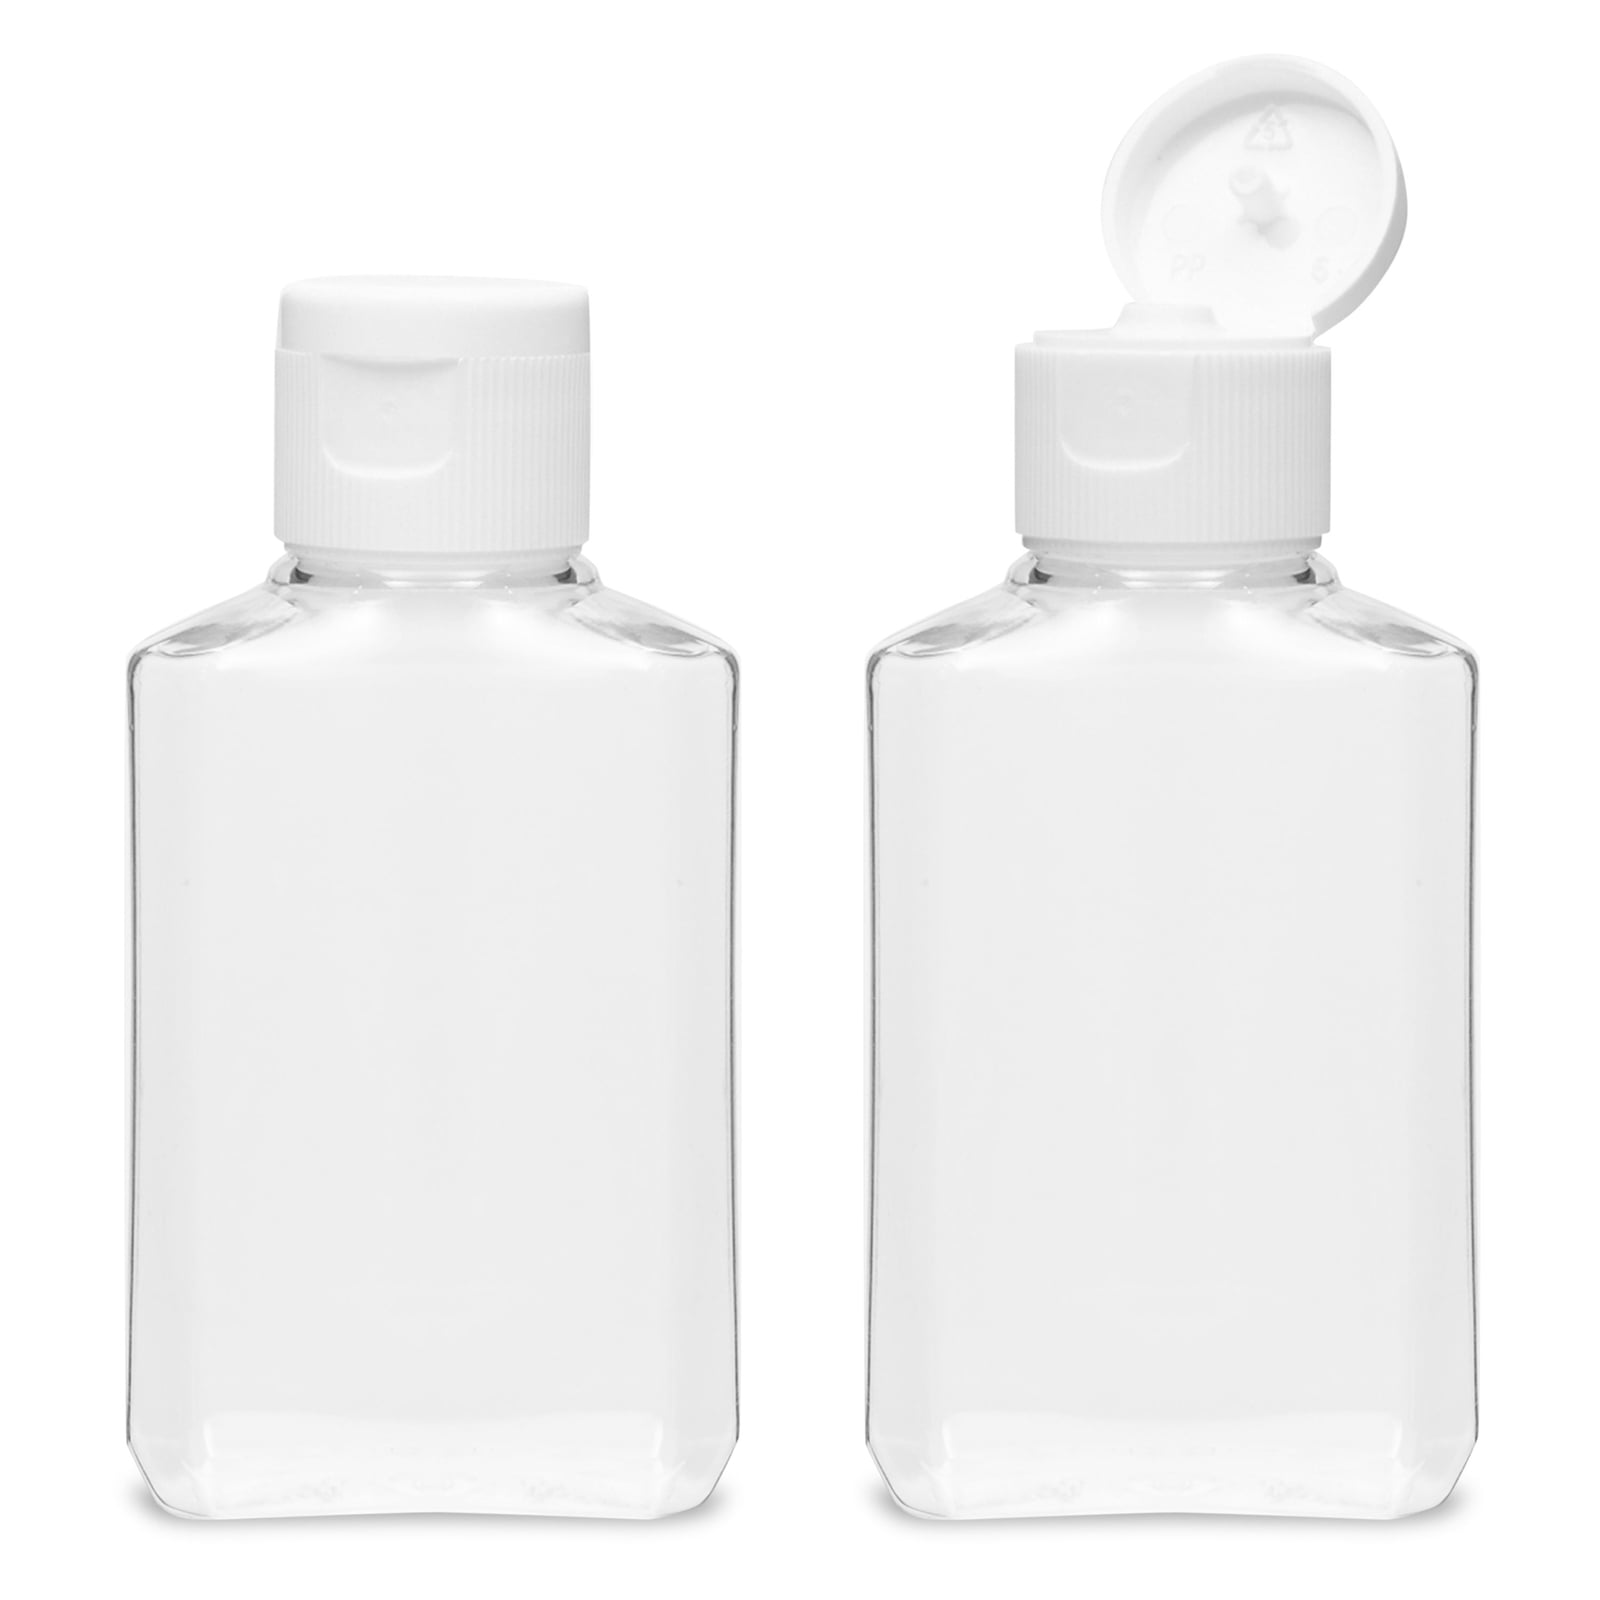 Durable Small plastic bottle for Liquid,Lotion,Oil,Pill food grade  container 5ML,10ML,15ML,30ML,60ML,100ML,125ML,250ML - Price history &  Review, AliExpress Seller - SHUISHAN PLASTIC Store